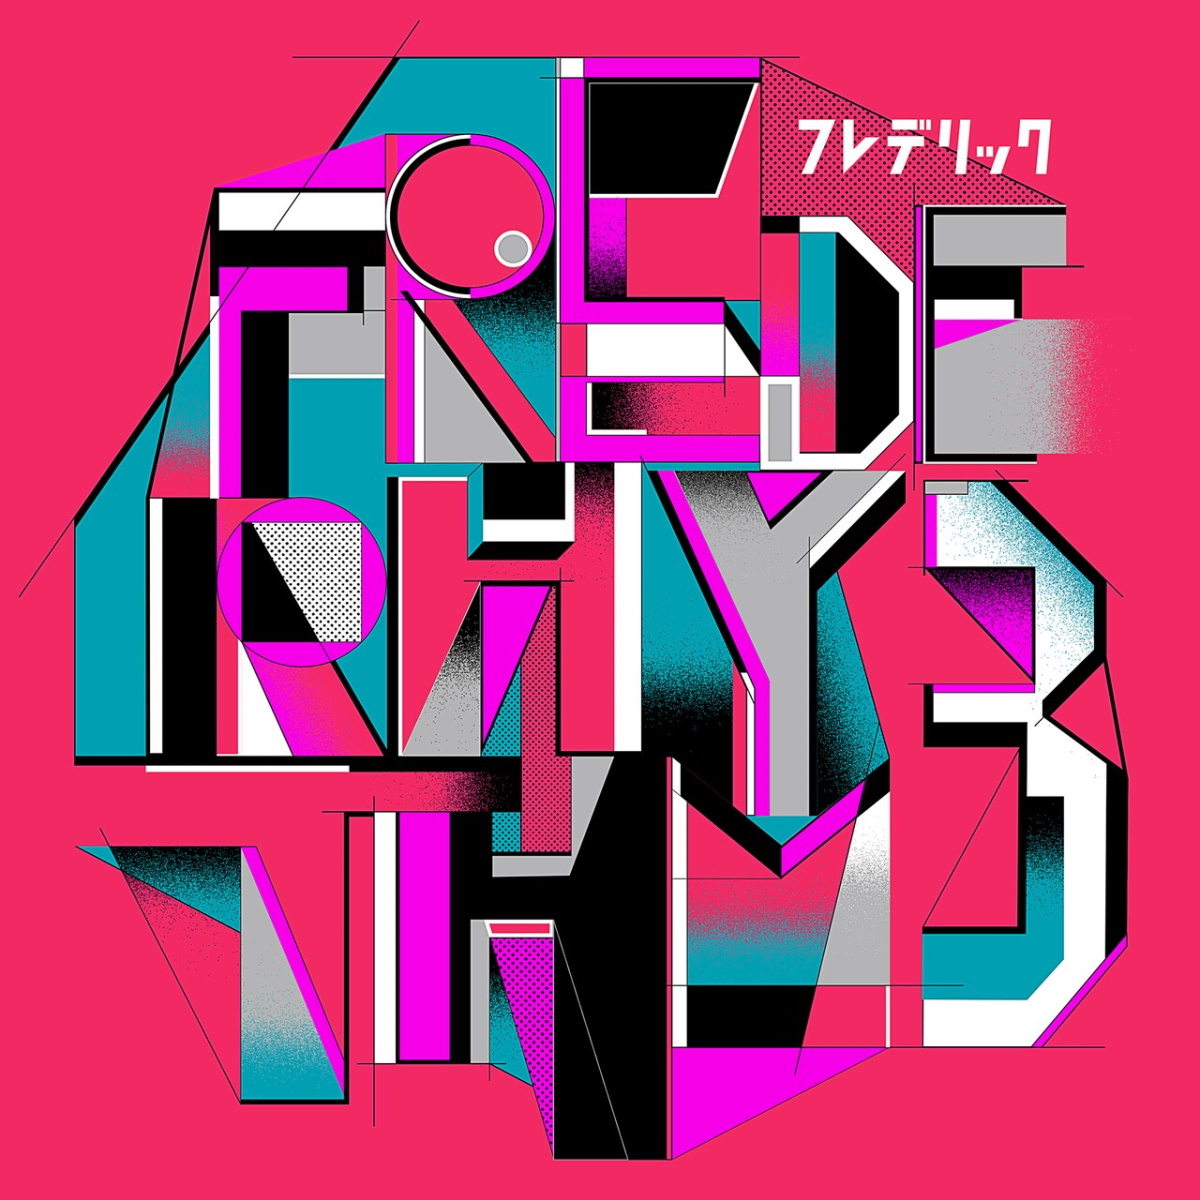 Cover art for『frederic - Nettaiya』from the release『Frederhythm 3』